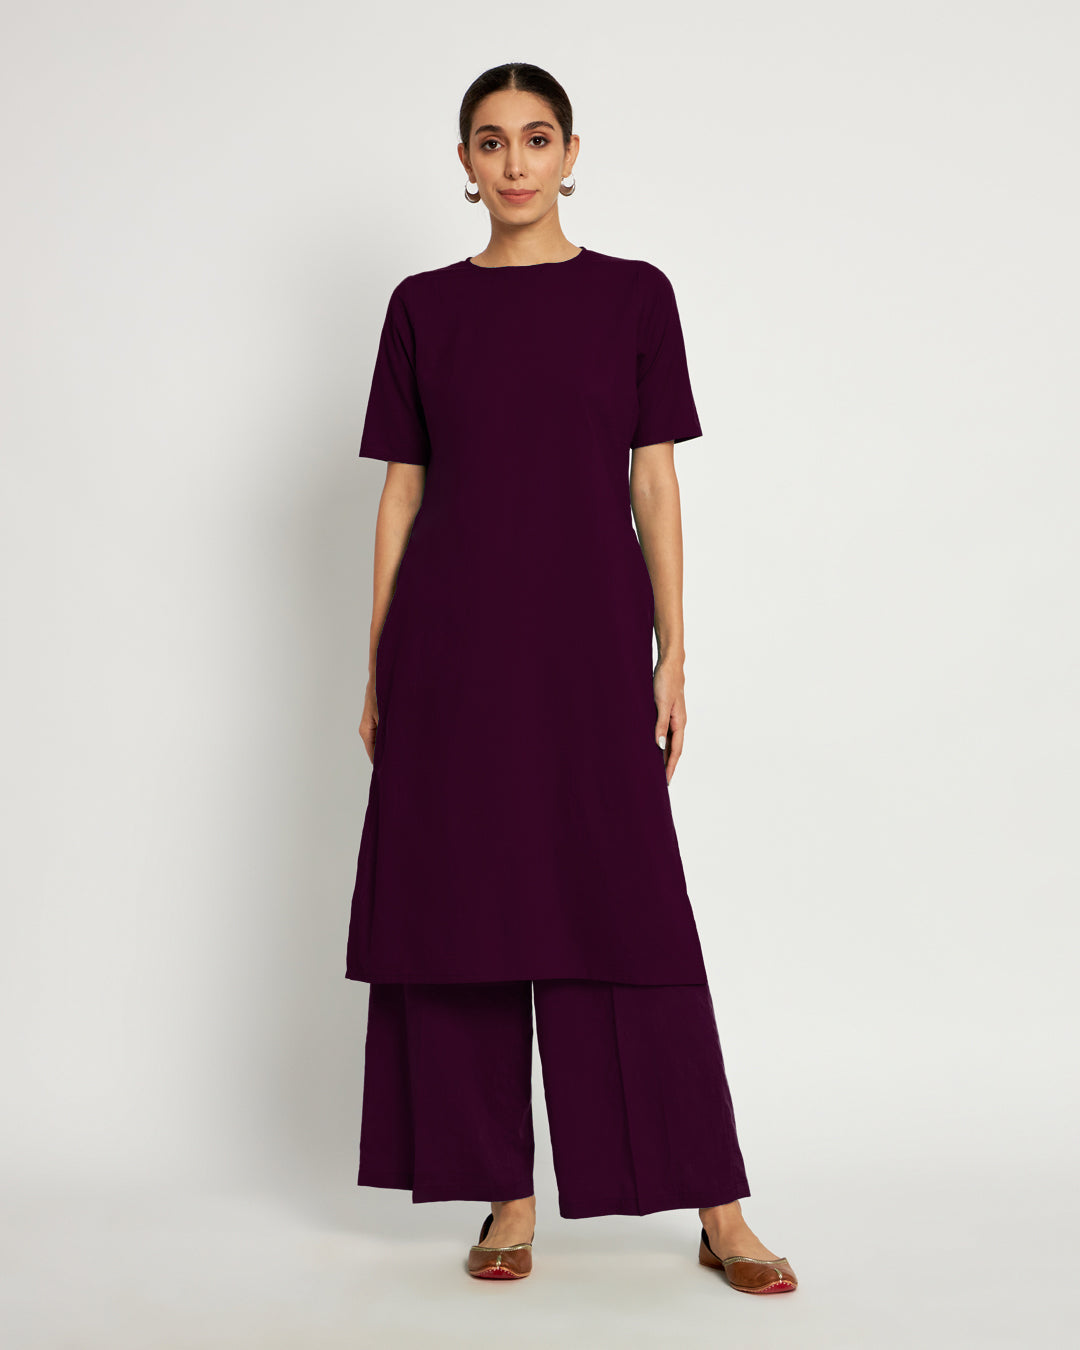 Plum Passion Round Neck Long Solid Kurta (Without Bottoms)